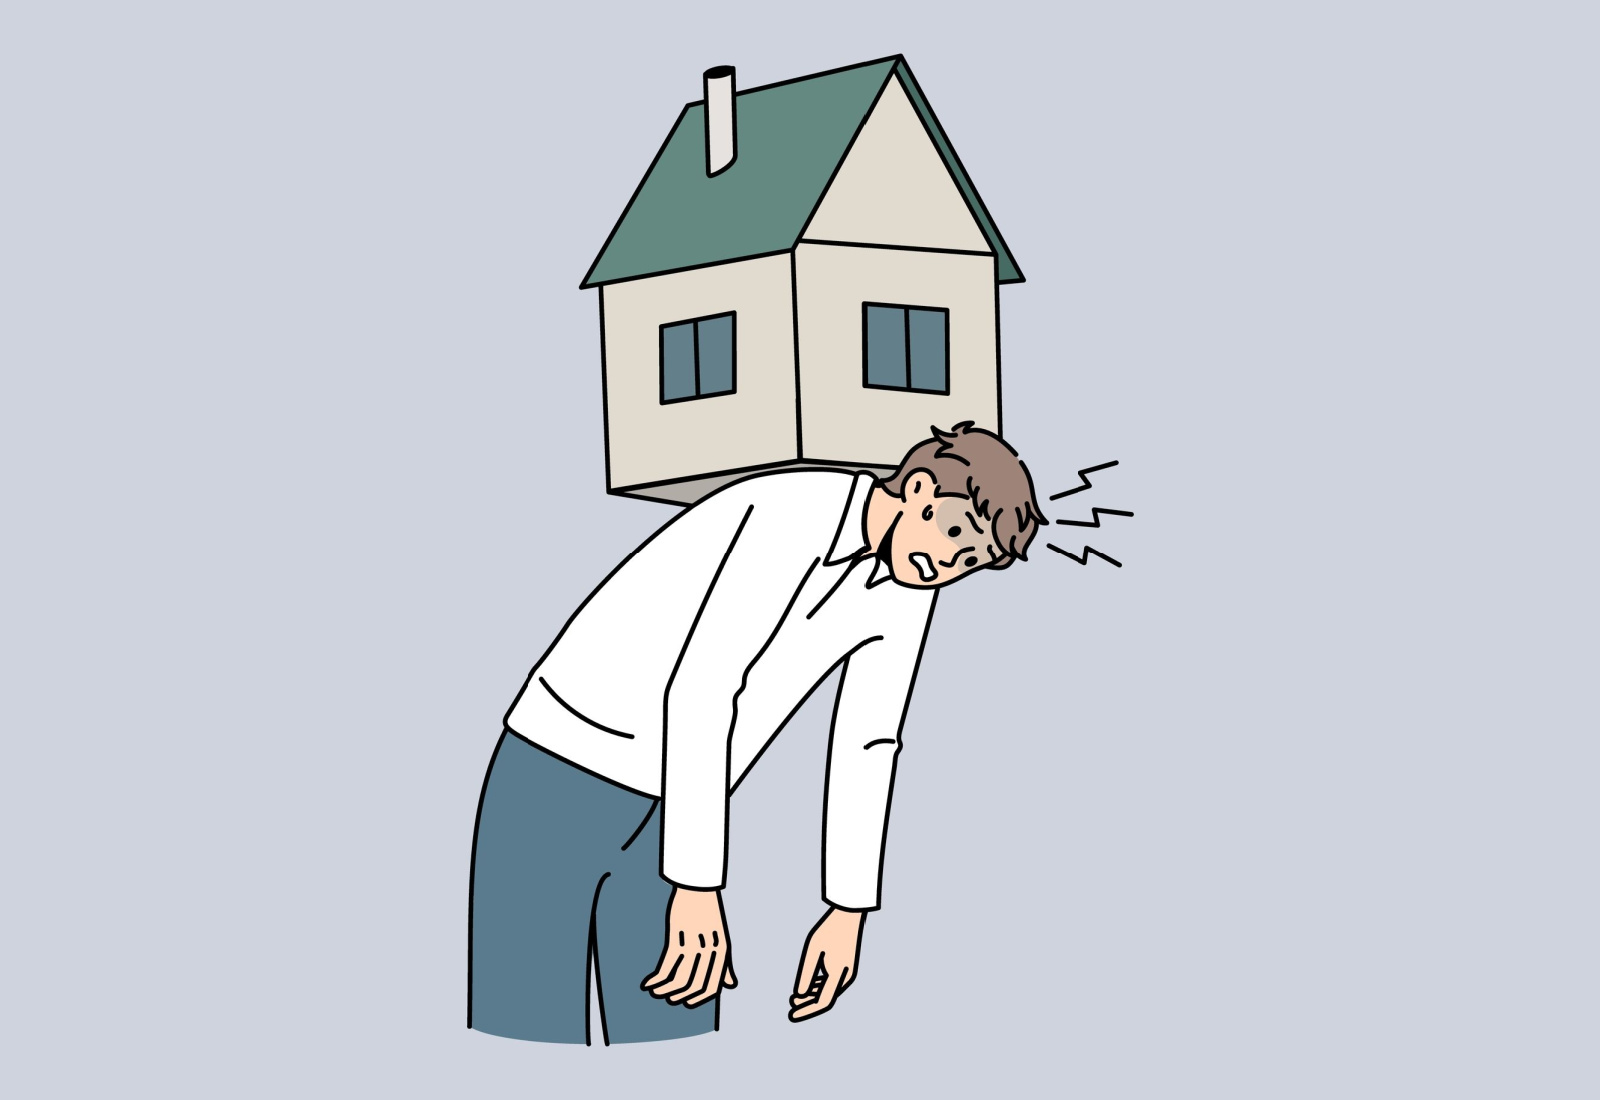 Man tired from being a landlord symbolized by a house on his back and struggling until he figures out how to sell his house fast for cash in Omaha